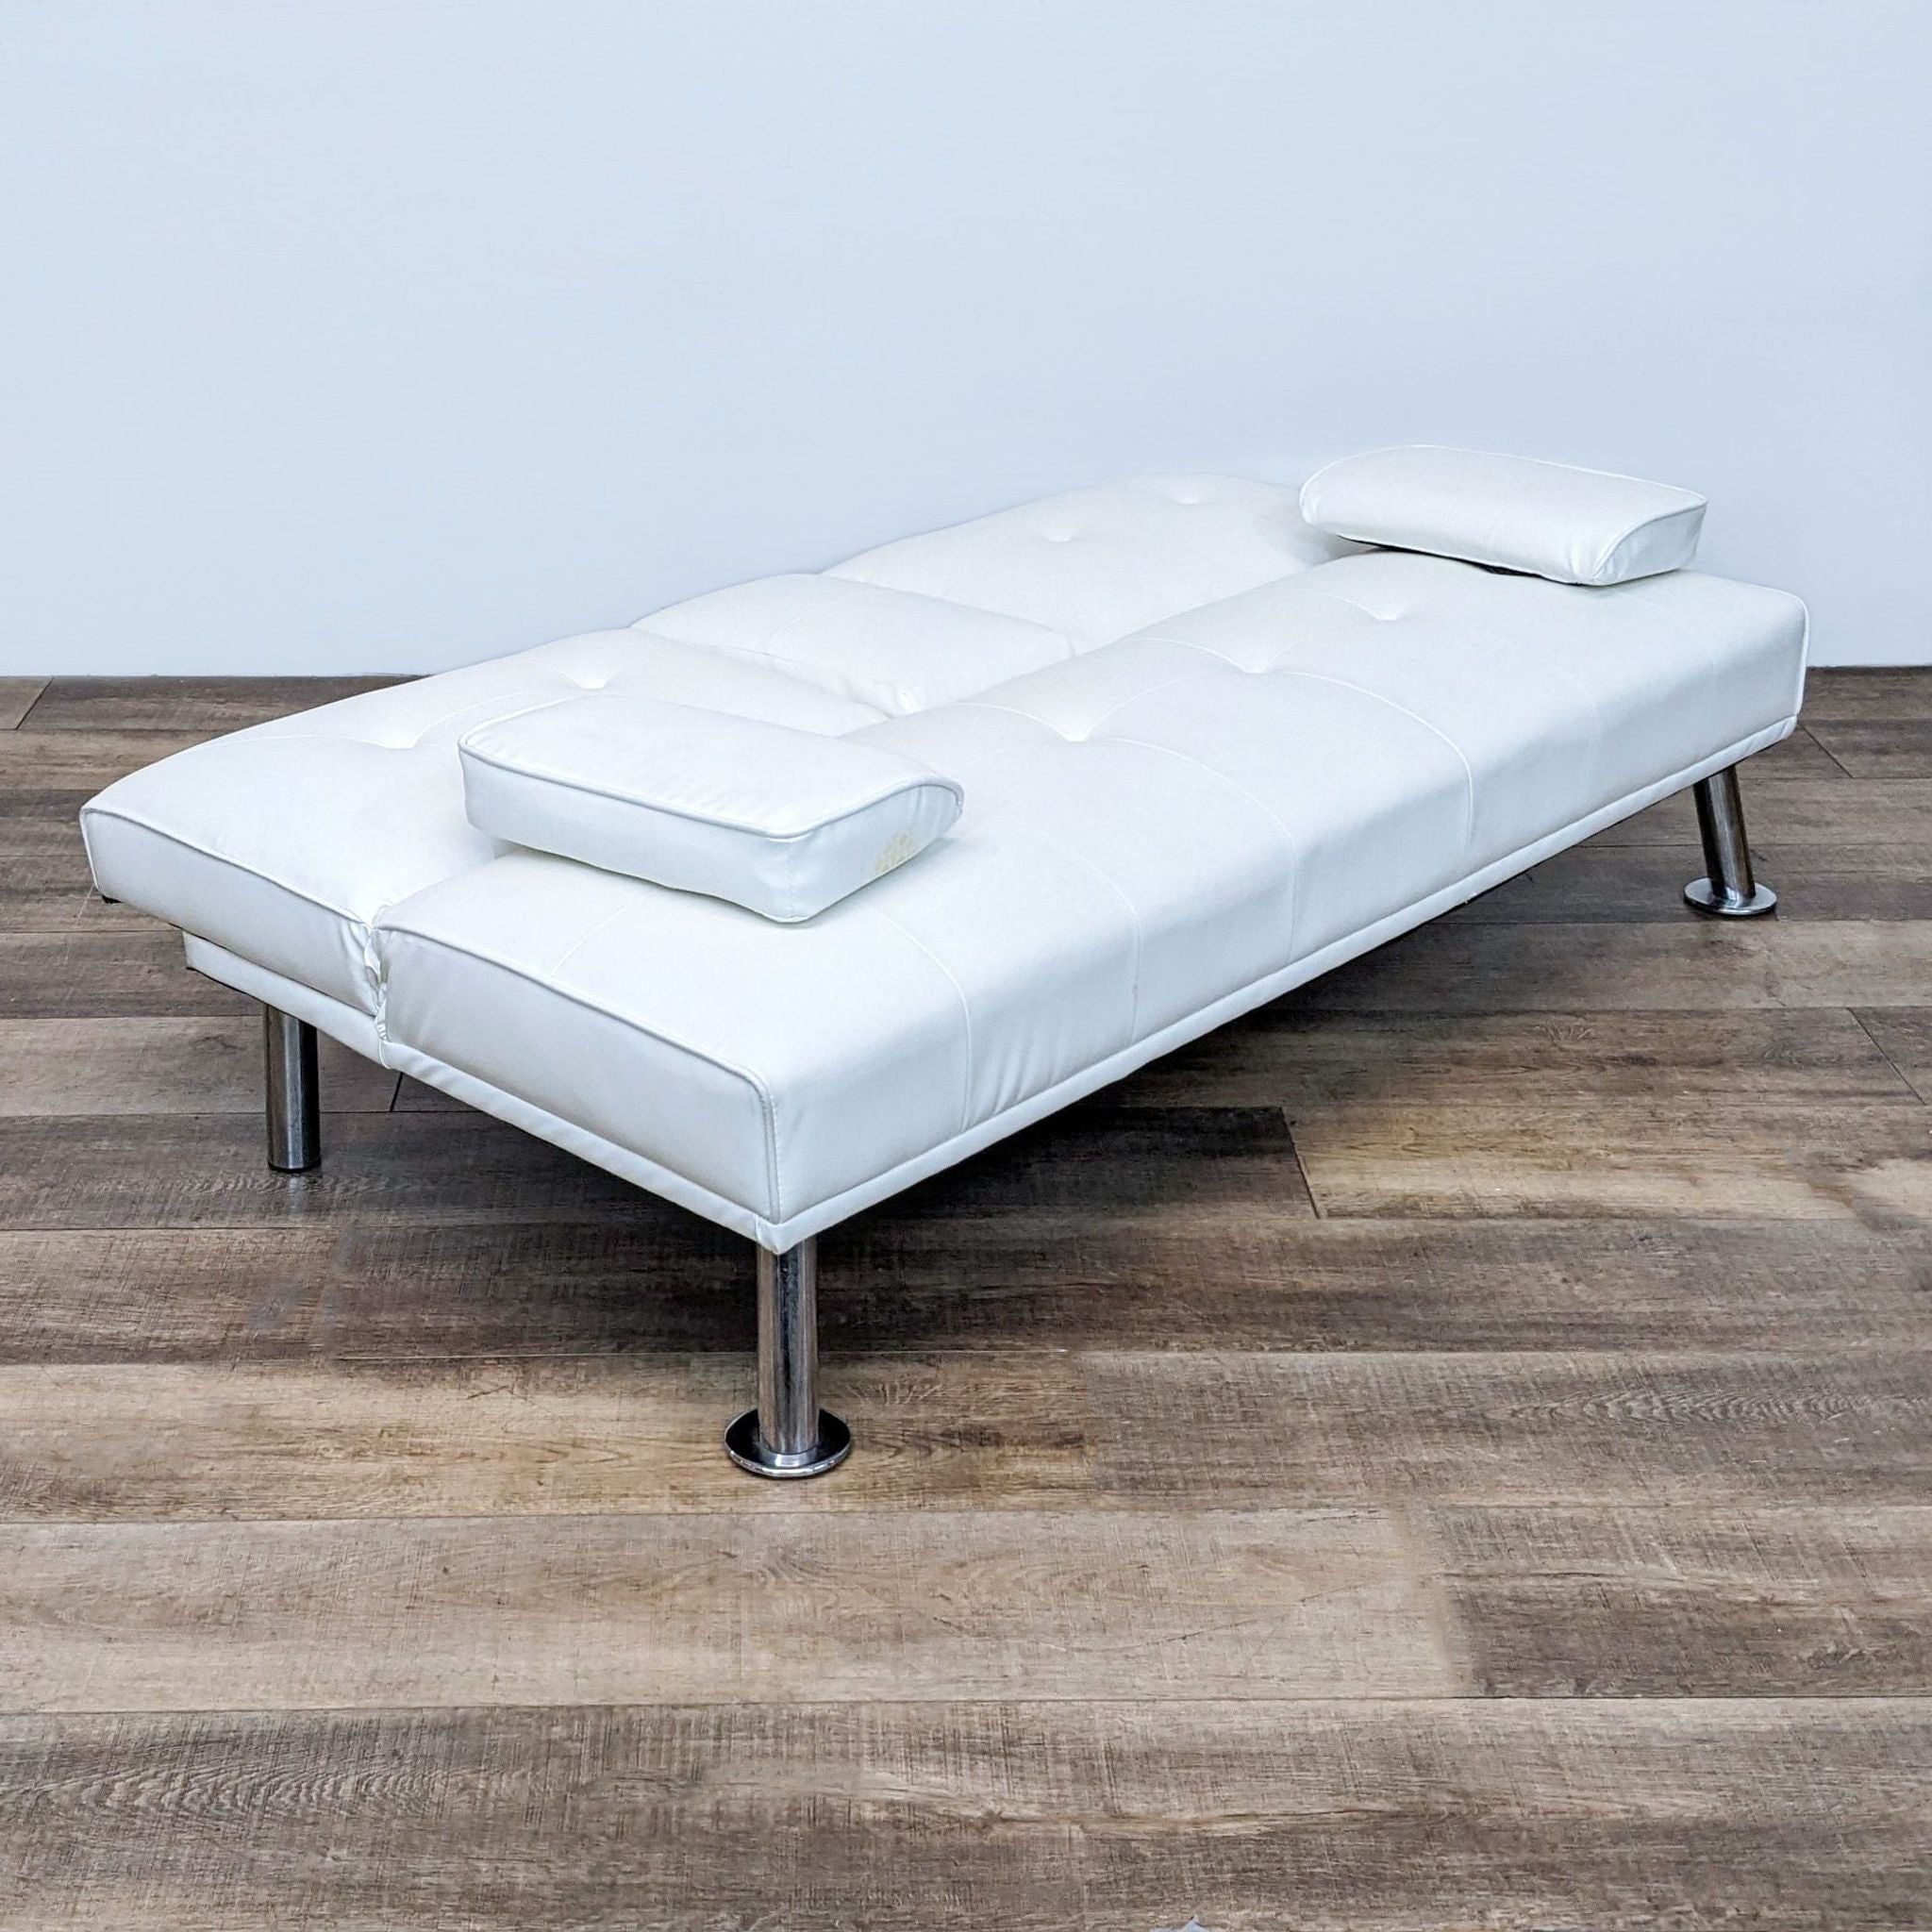 Alt text 2: White Reperch convertible sofa flattened into a bed with two cushions, on wooden flooring.